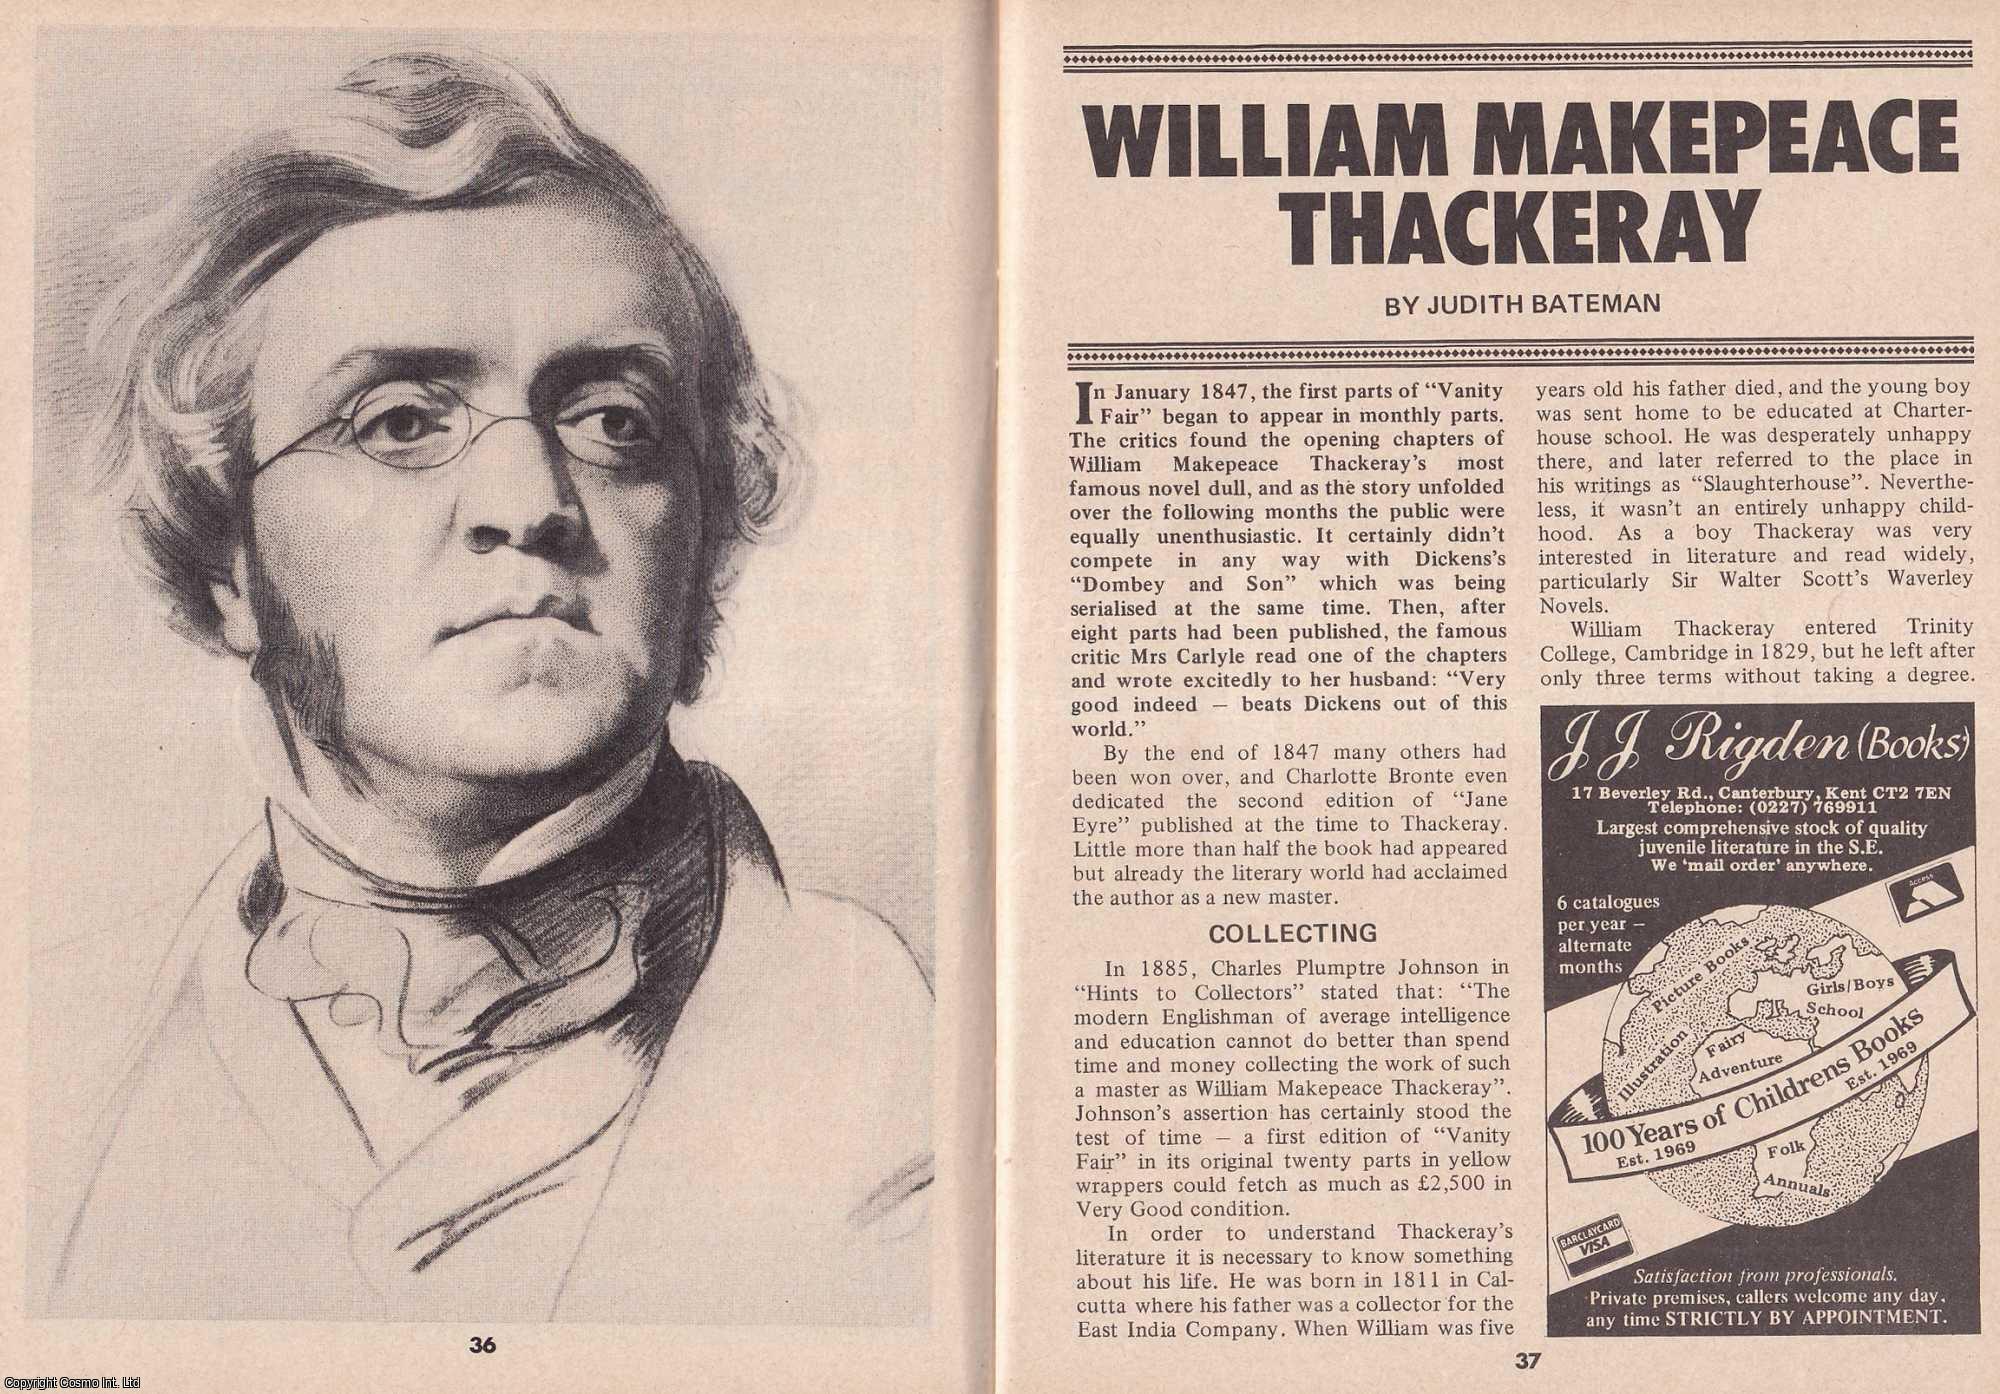 Judith Bateman - William Makepeace Thackeray (English novelist). This is an original article separated from an issue of The Book & Magazine Collector publication.